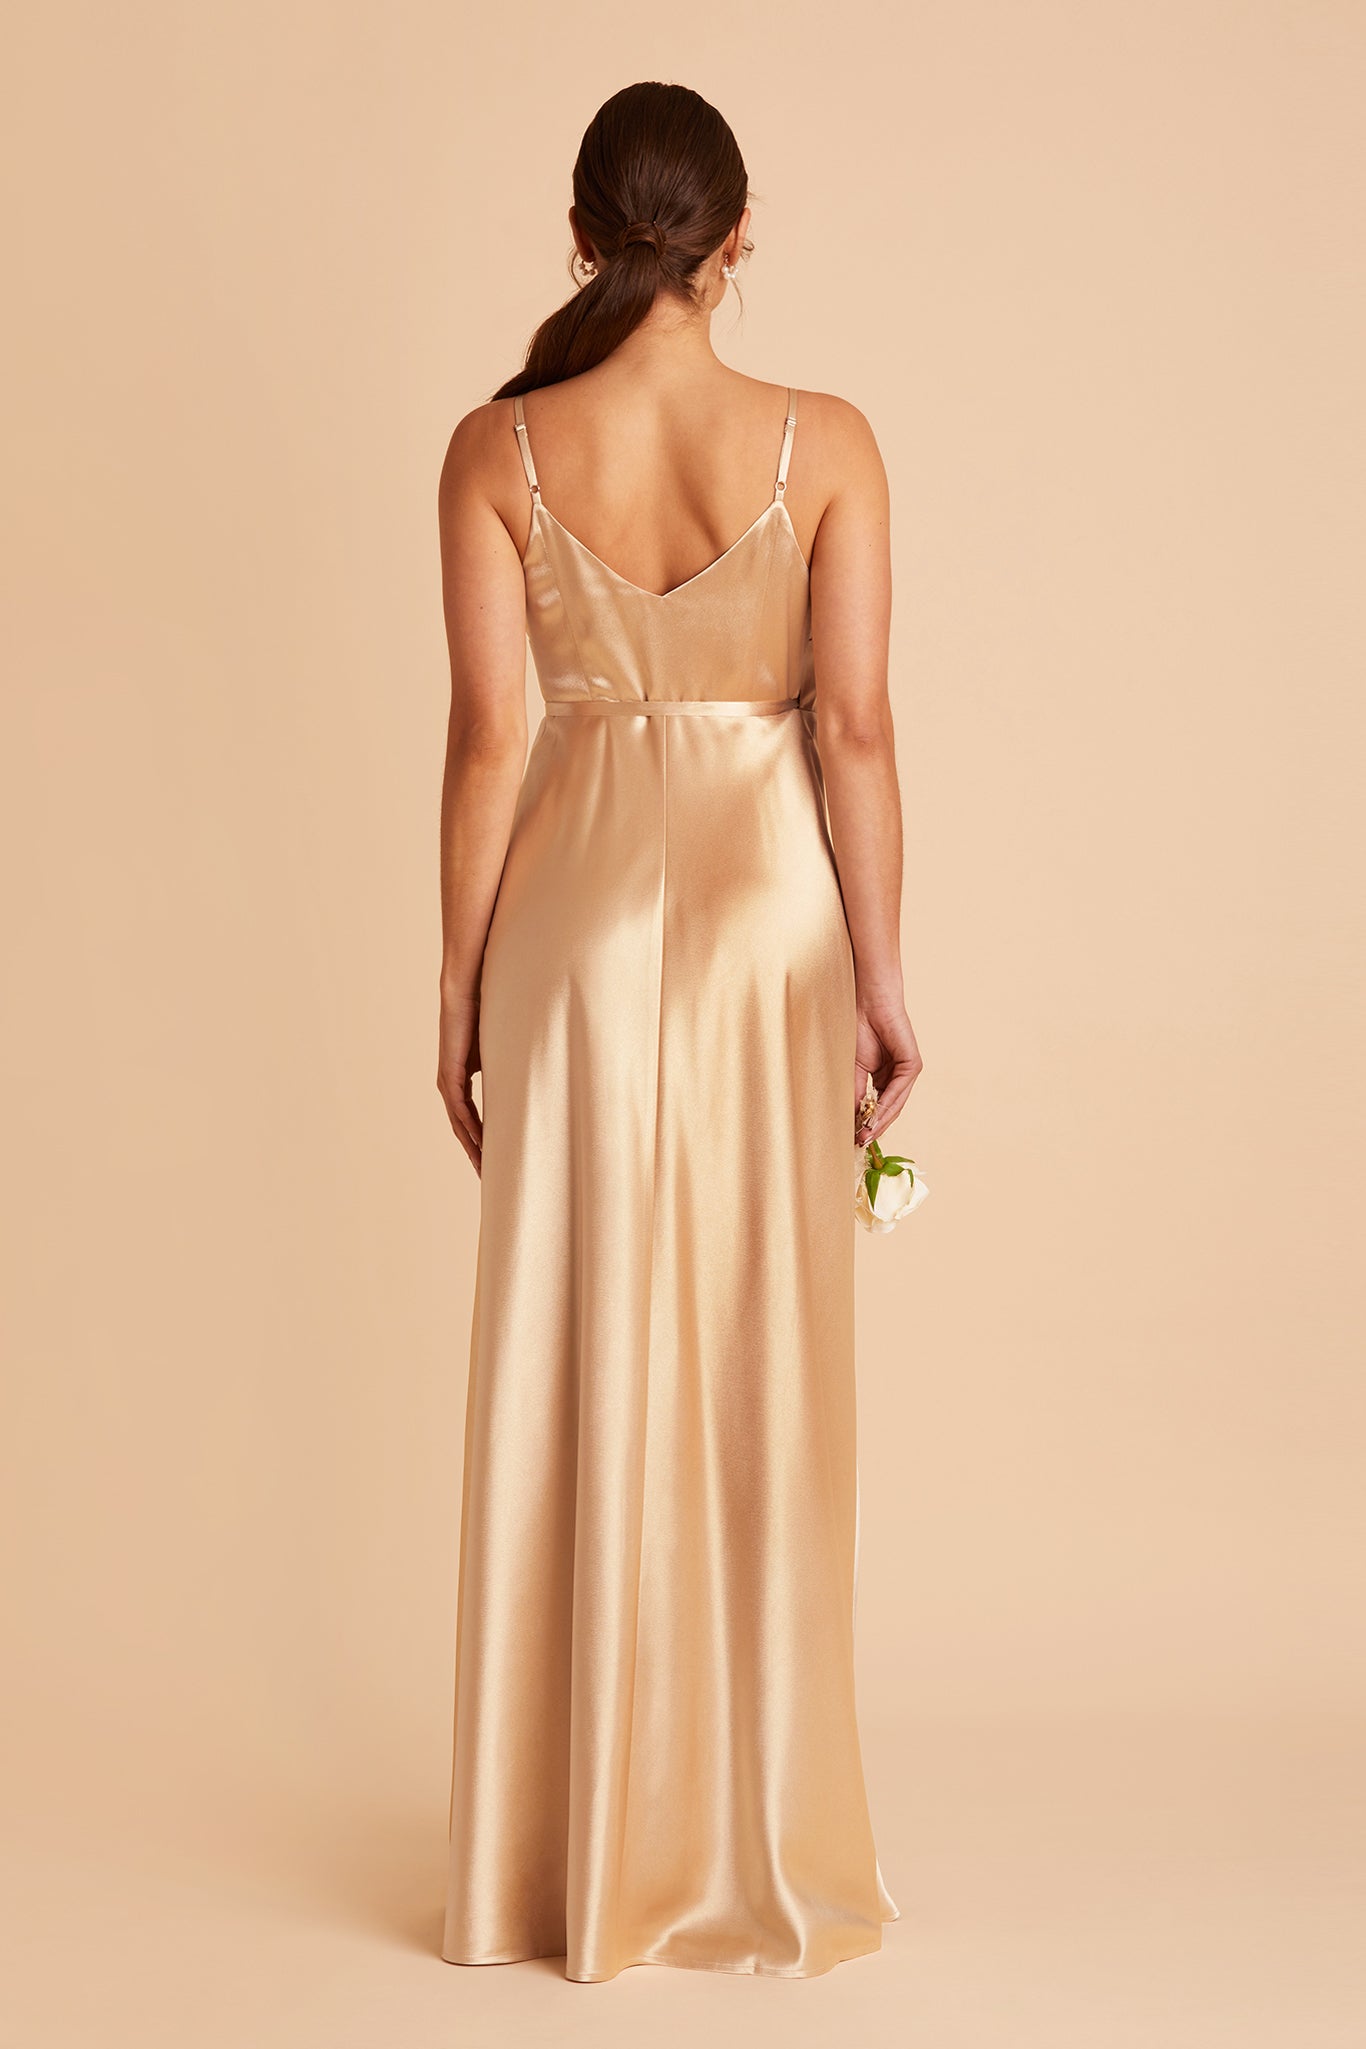 Cindy Satin Dress in gold satin by Birdy Grey, back view